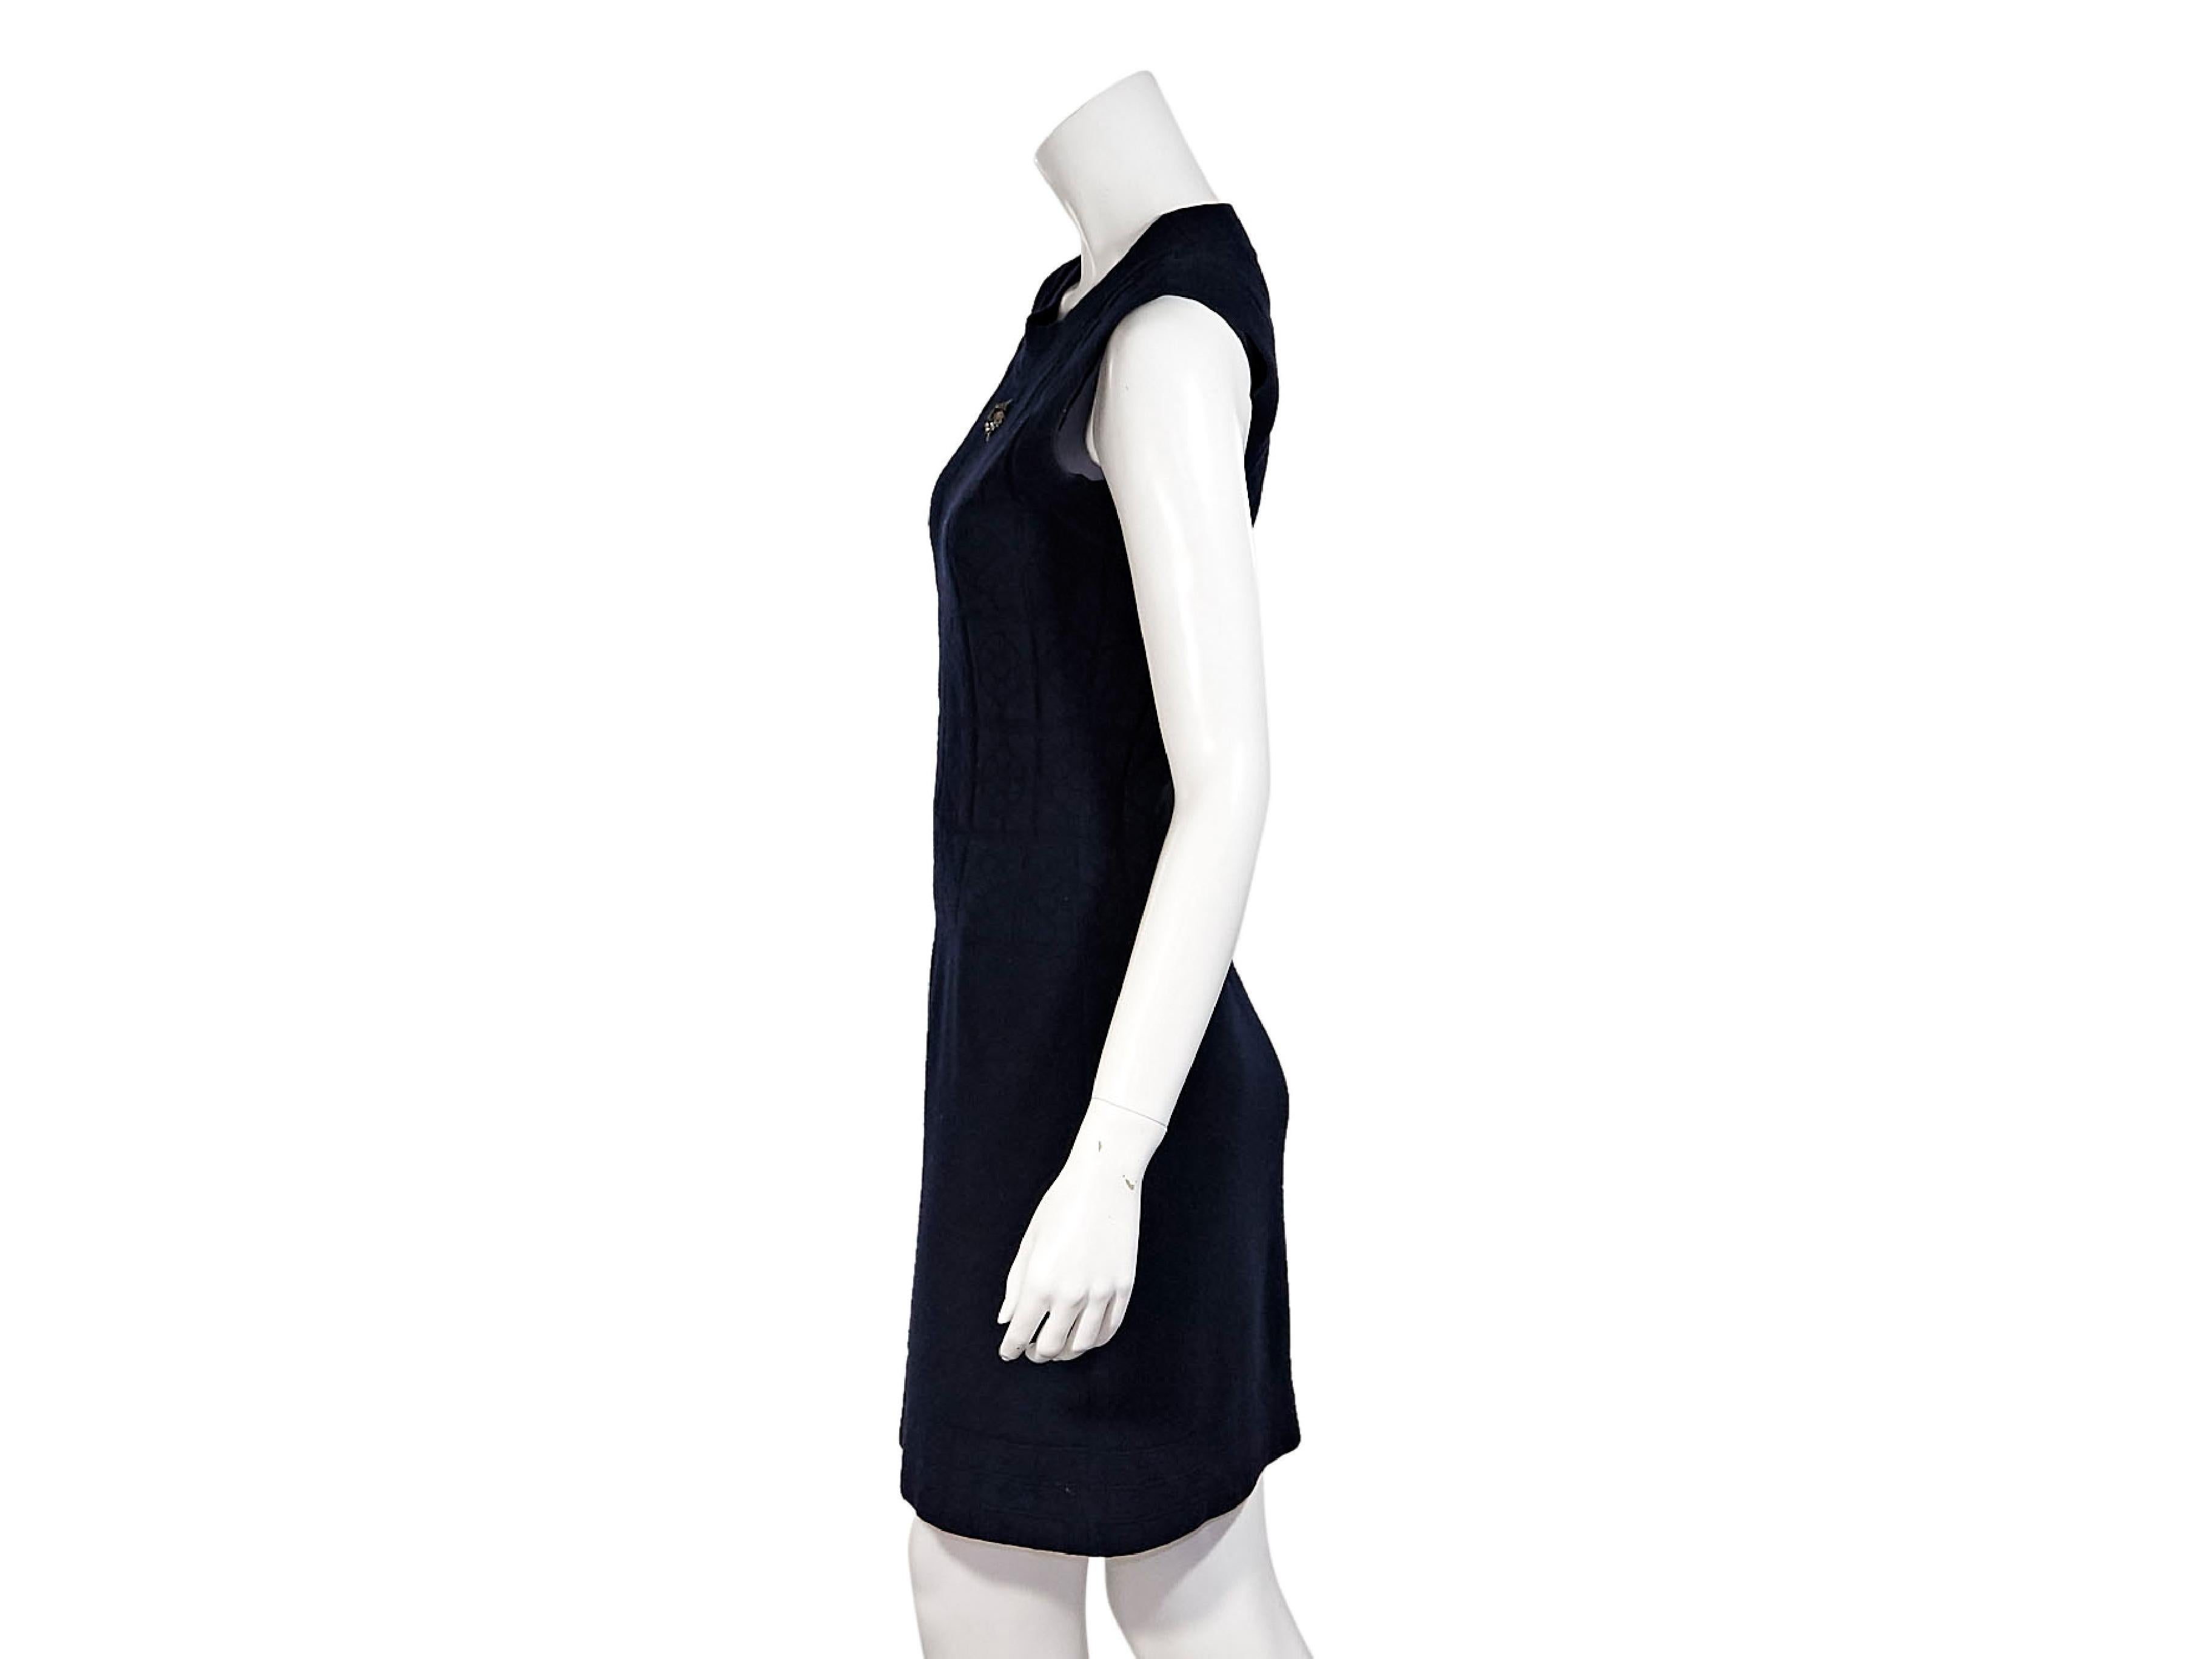 Product details:  Navy blue stretch wool/cashmere-blend knit dress by Chanel.  Crewneck.  Sleeveless.  Goldtone sequin accent at bodice.  Pullover style.  32